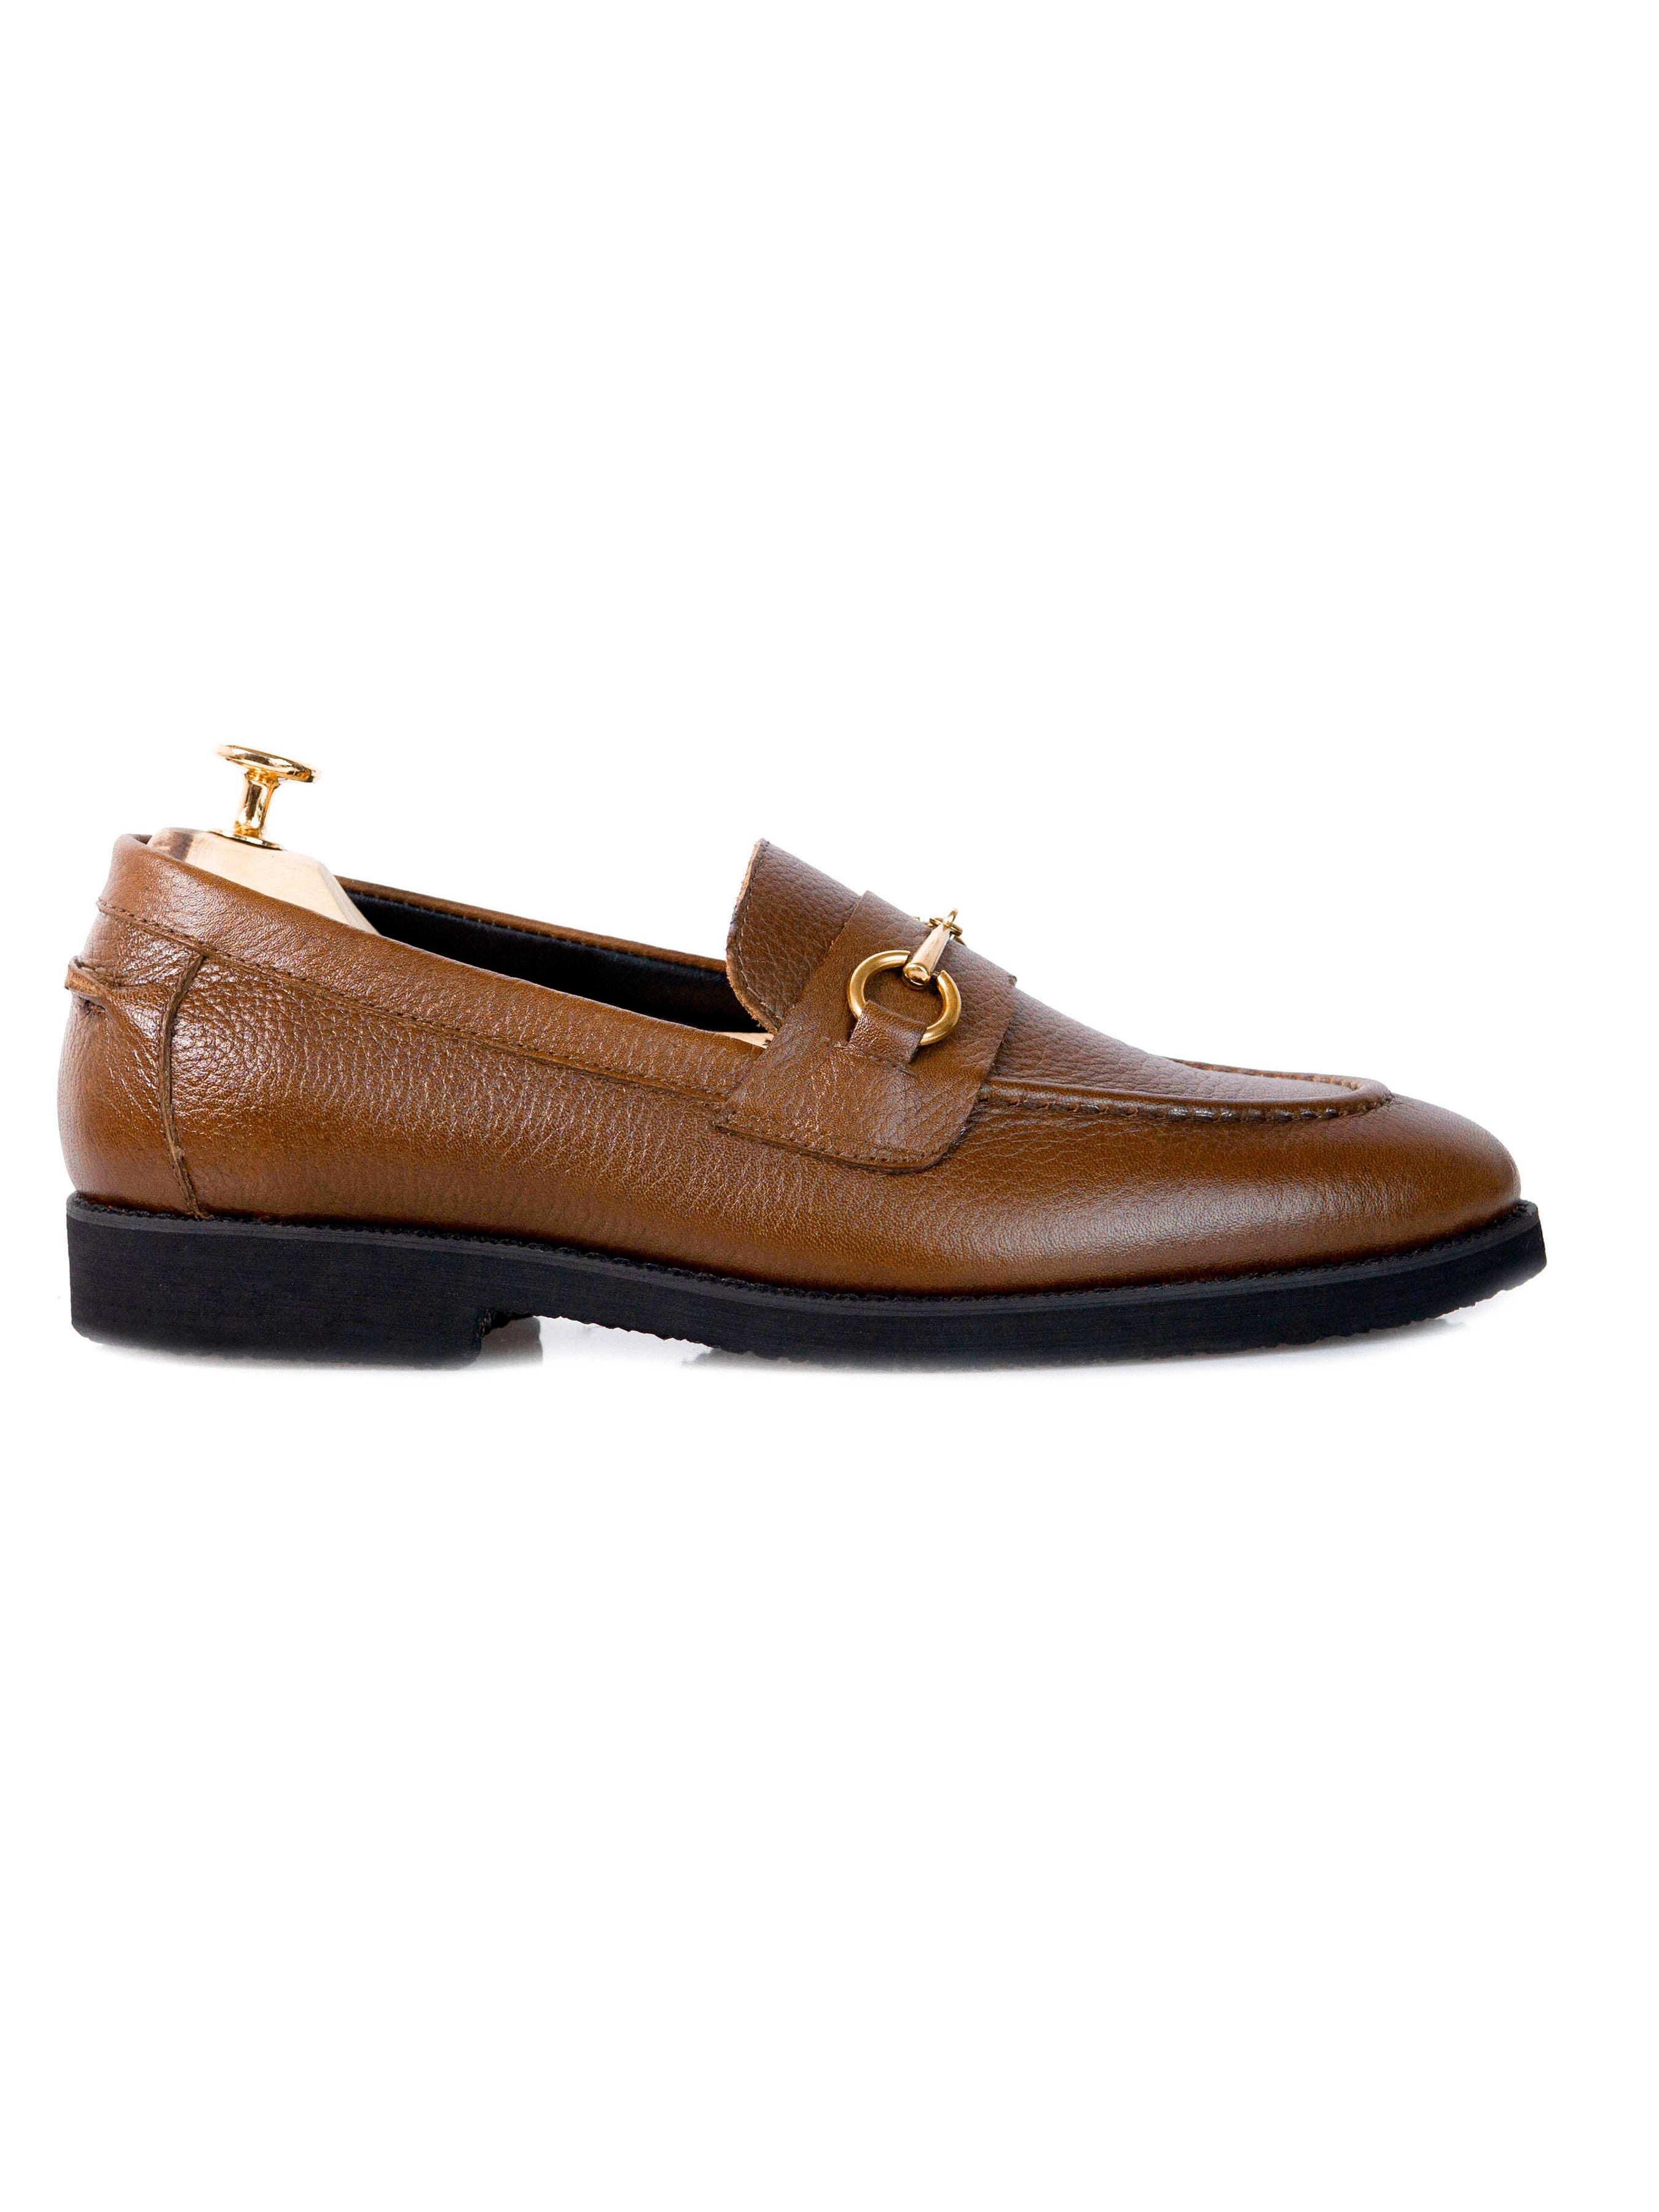 Penny Loafer Horsebit Buckle - Tobacco Brown Pebble Grain Leather (Crepe Sole)